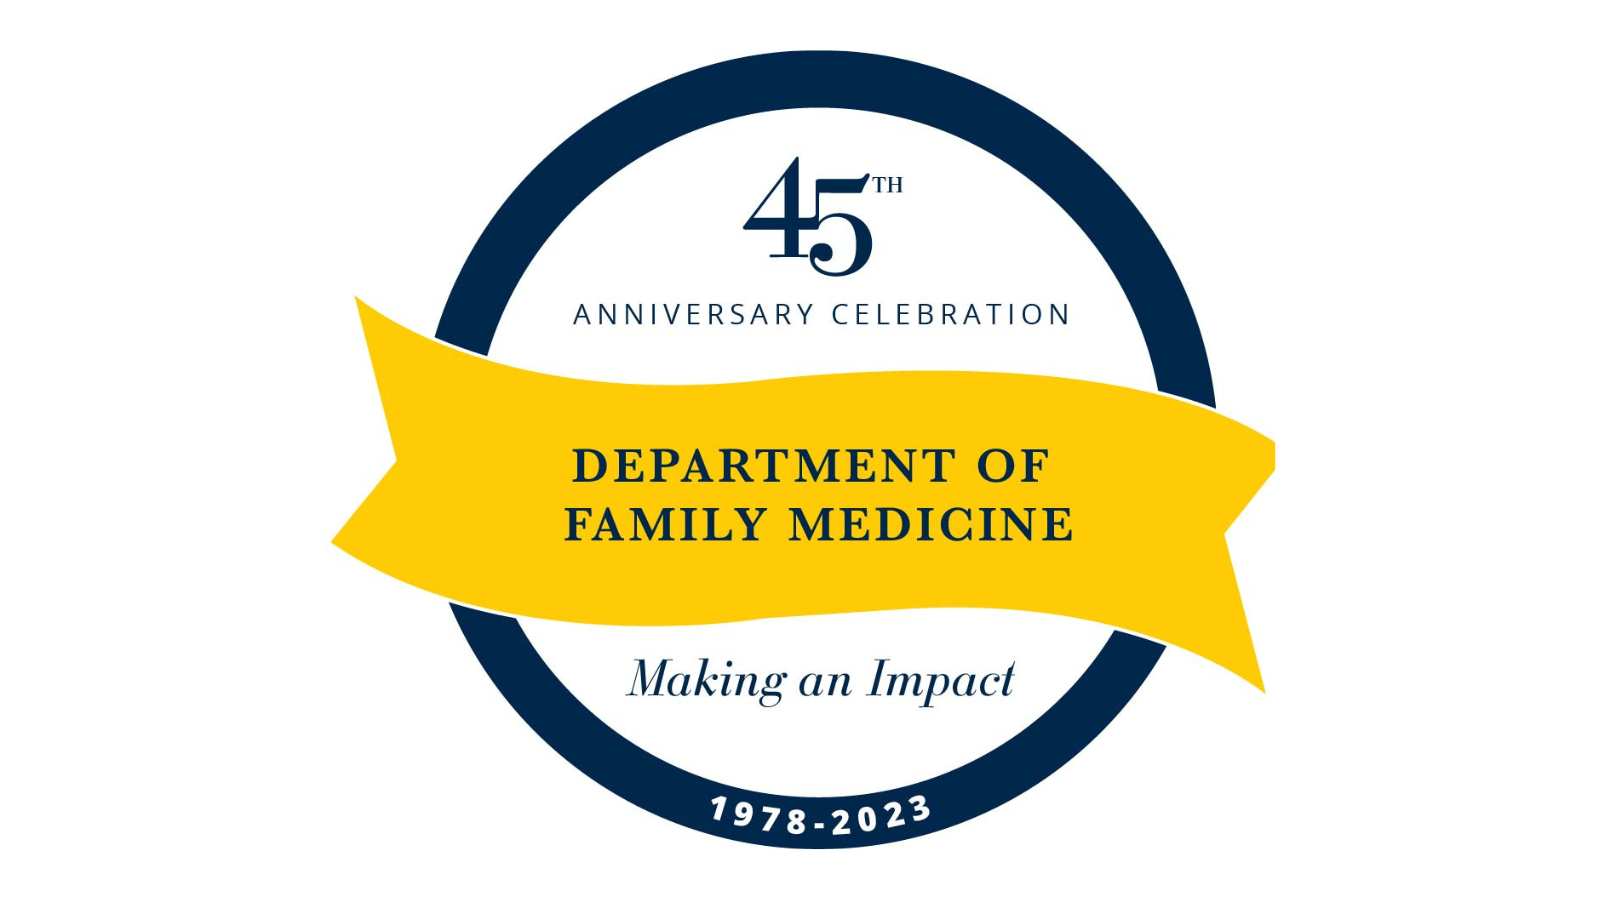 45th Anniversary Celebration Department of Family Medicine Making an Impact 1978-2023 Join us to celebrate 45 years  of Family Medicine at the  University of Michigan May 19-20, 2023, Resident Alumni Reunion, CME Course, Dinner & Program, Register 